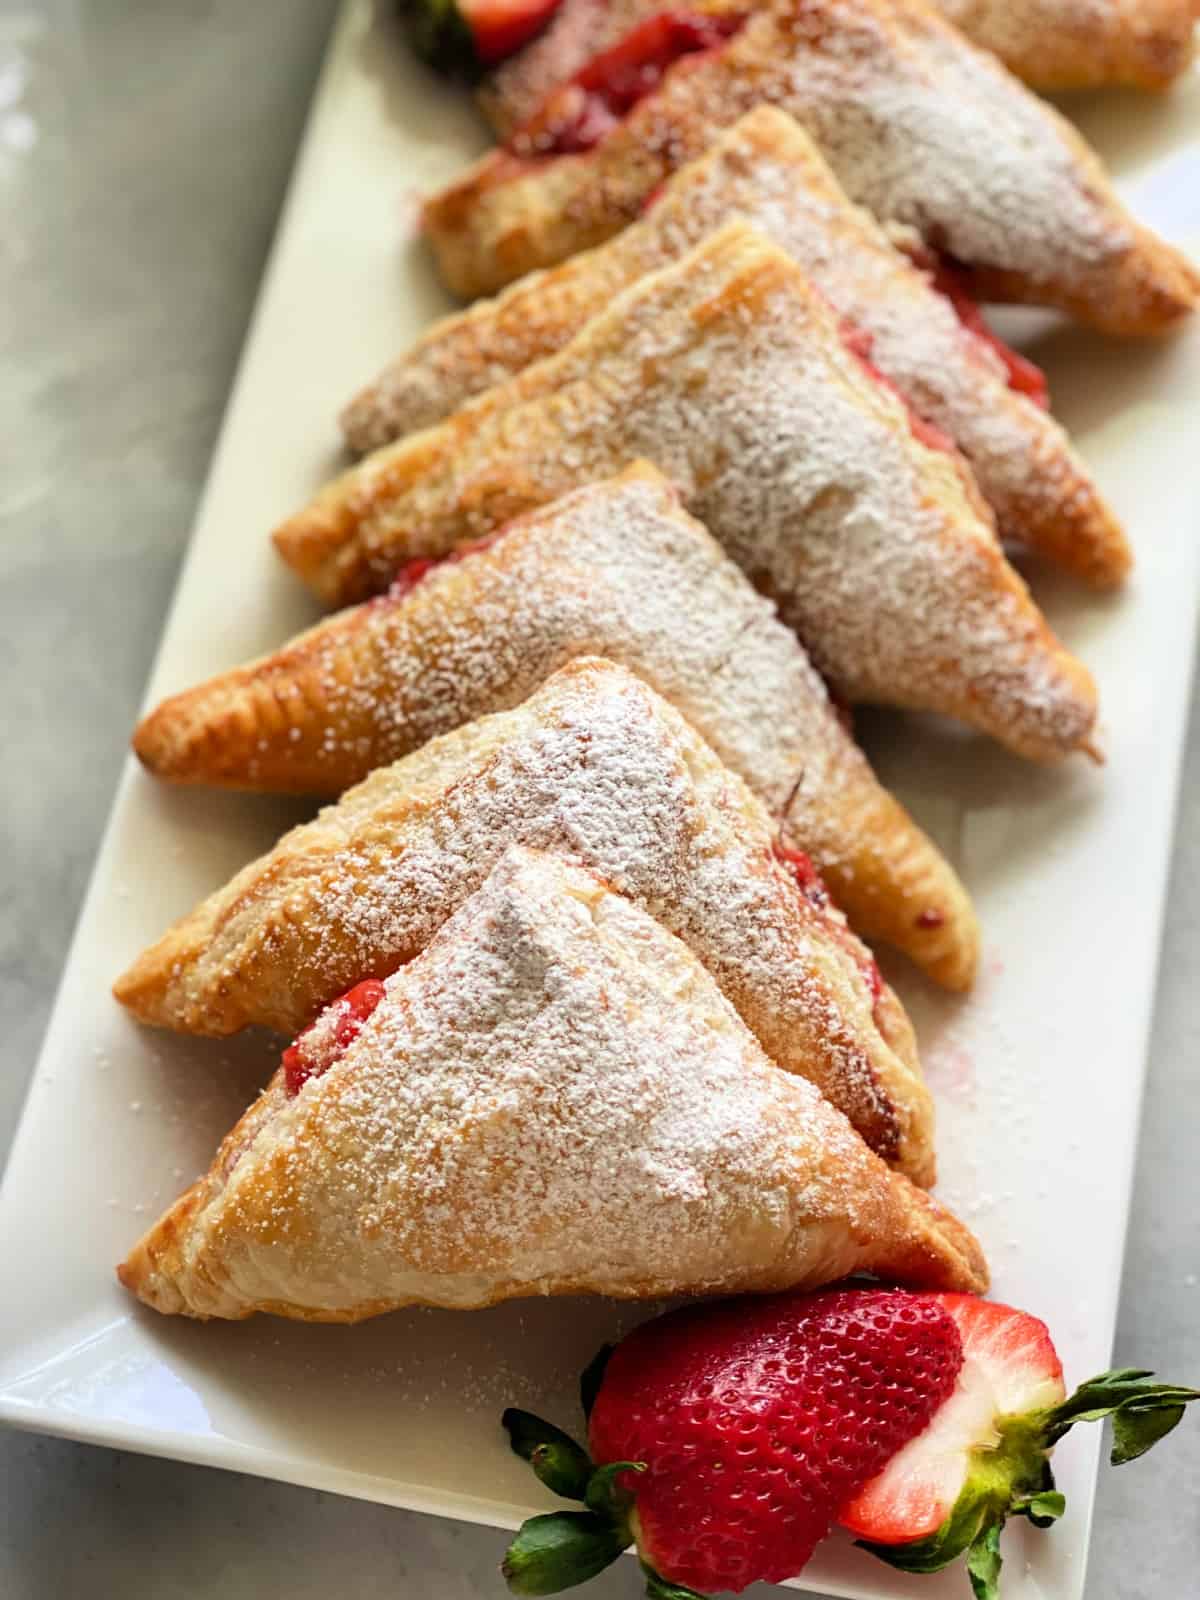 White platter with 6 turnovers dusted with confectioners' sugar.